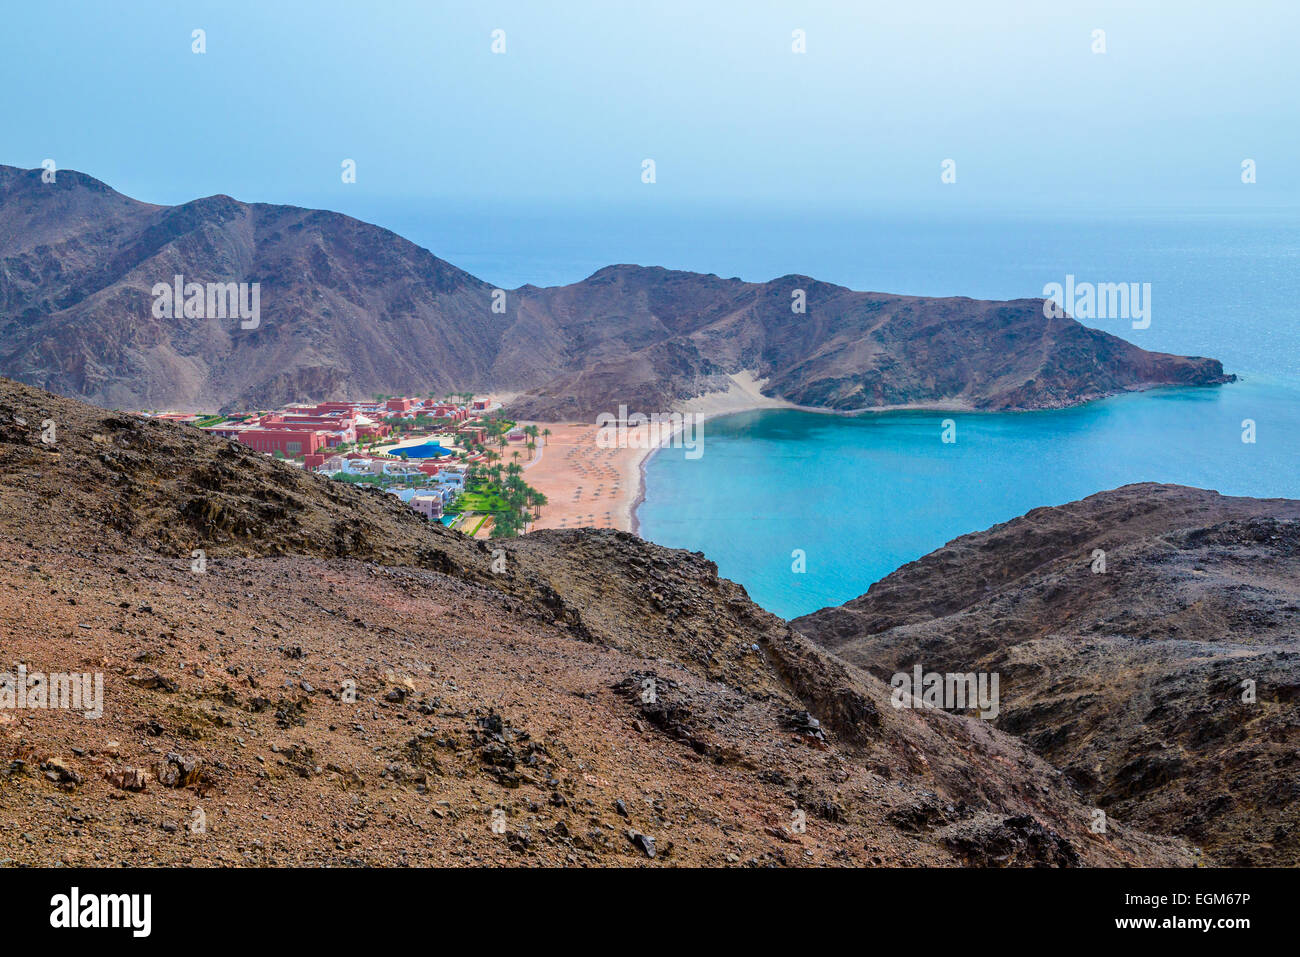 View over club Med hotel and resort near Taba Heights, located on the Red Sea overlooking the Gulf of Aqaba Stock Photo